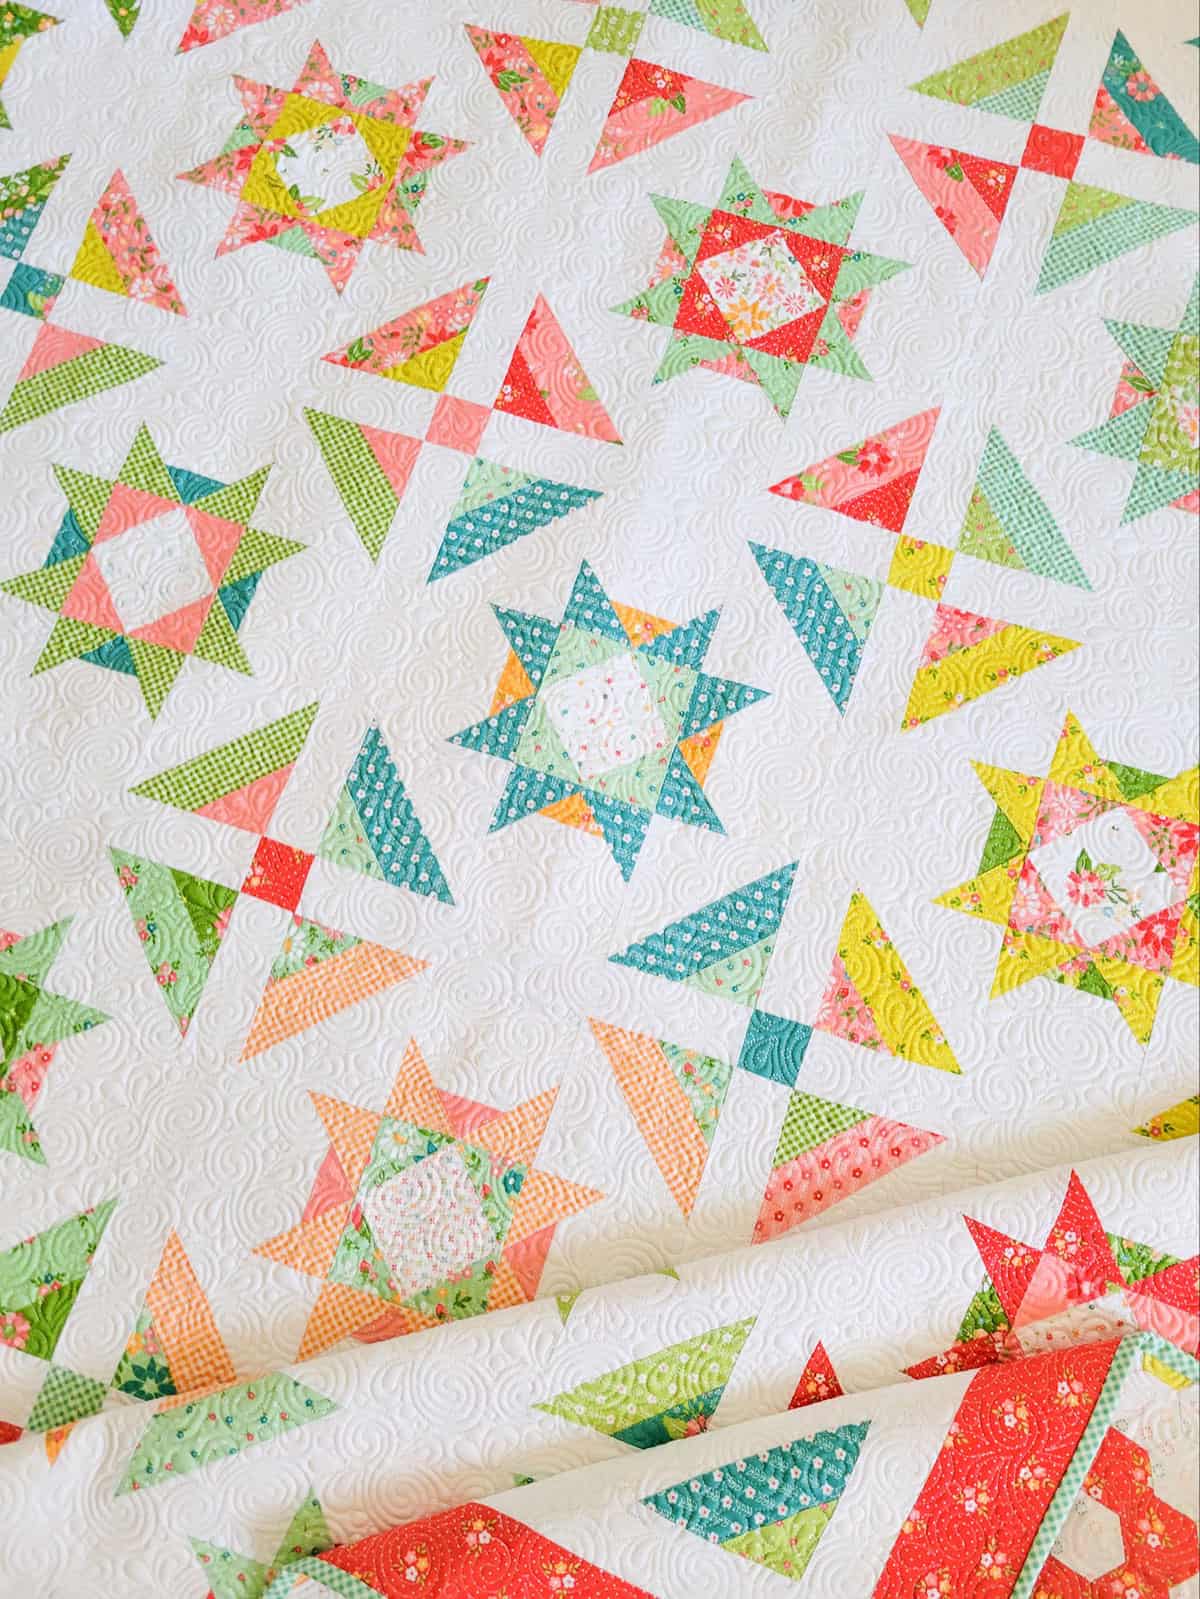 Stars and Patchwork quilt in a rainbow of bright colors